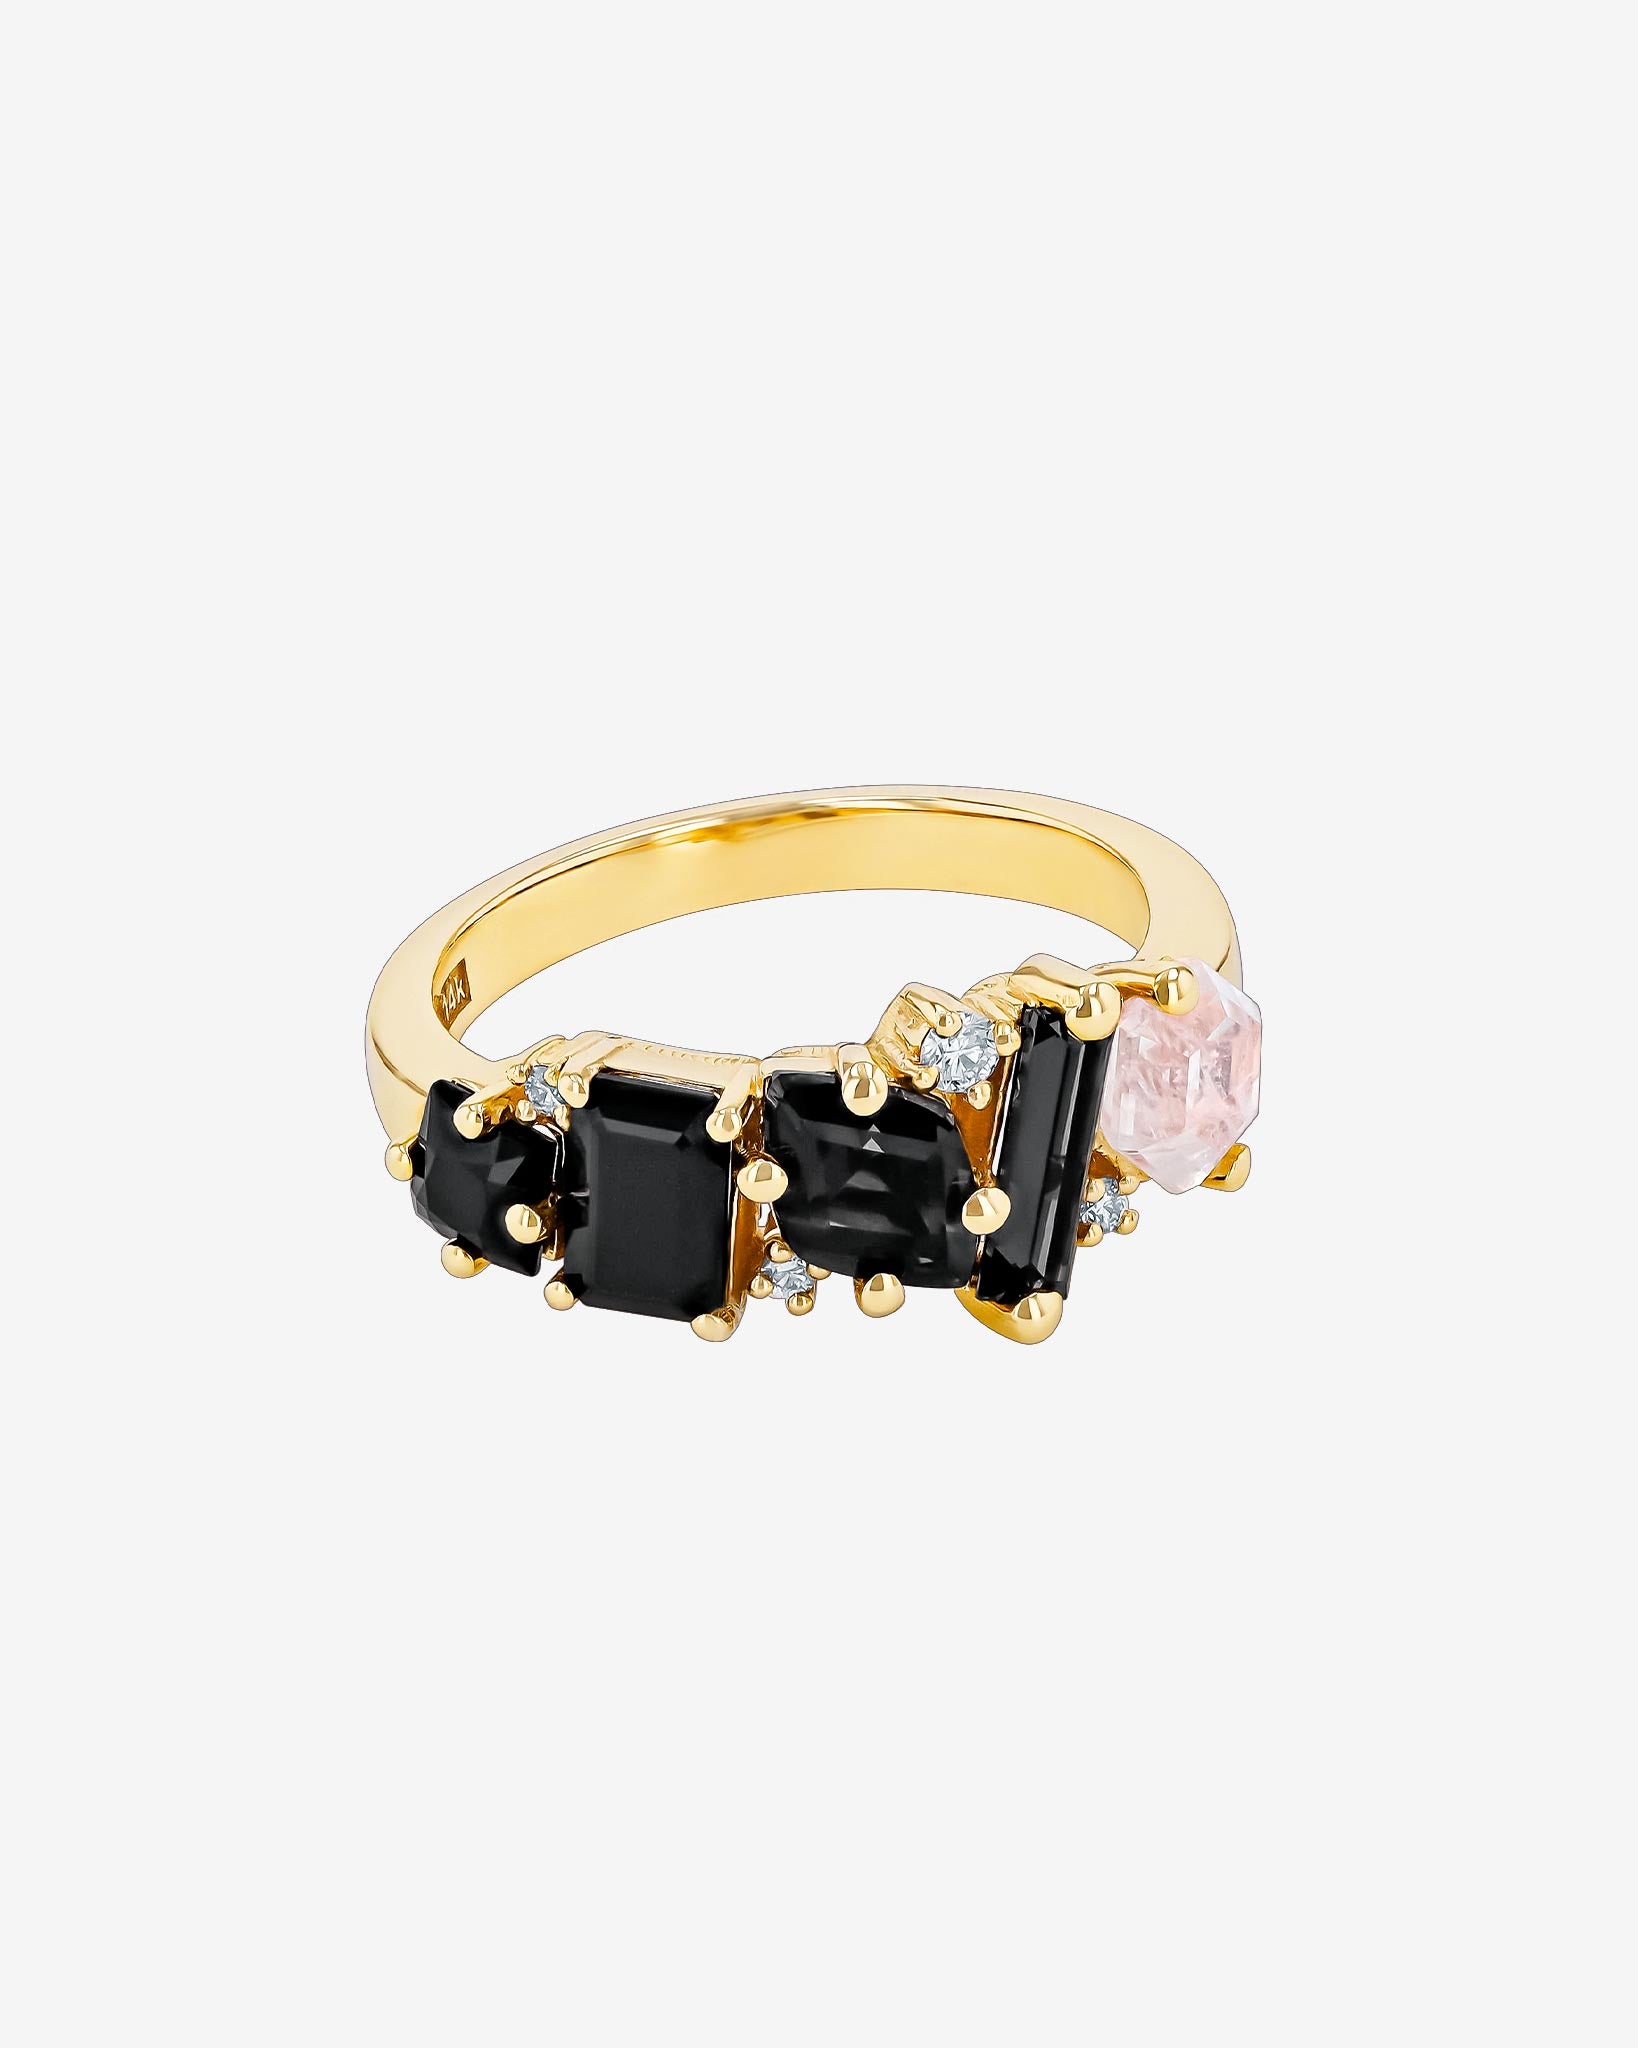 Kalan By Suzanne Kalan Nadima Blend Black Ombre Ring in 14k yellow gold